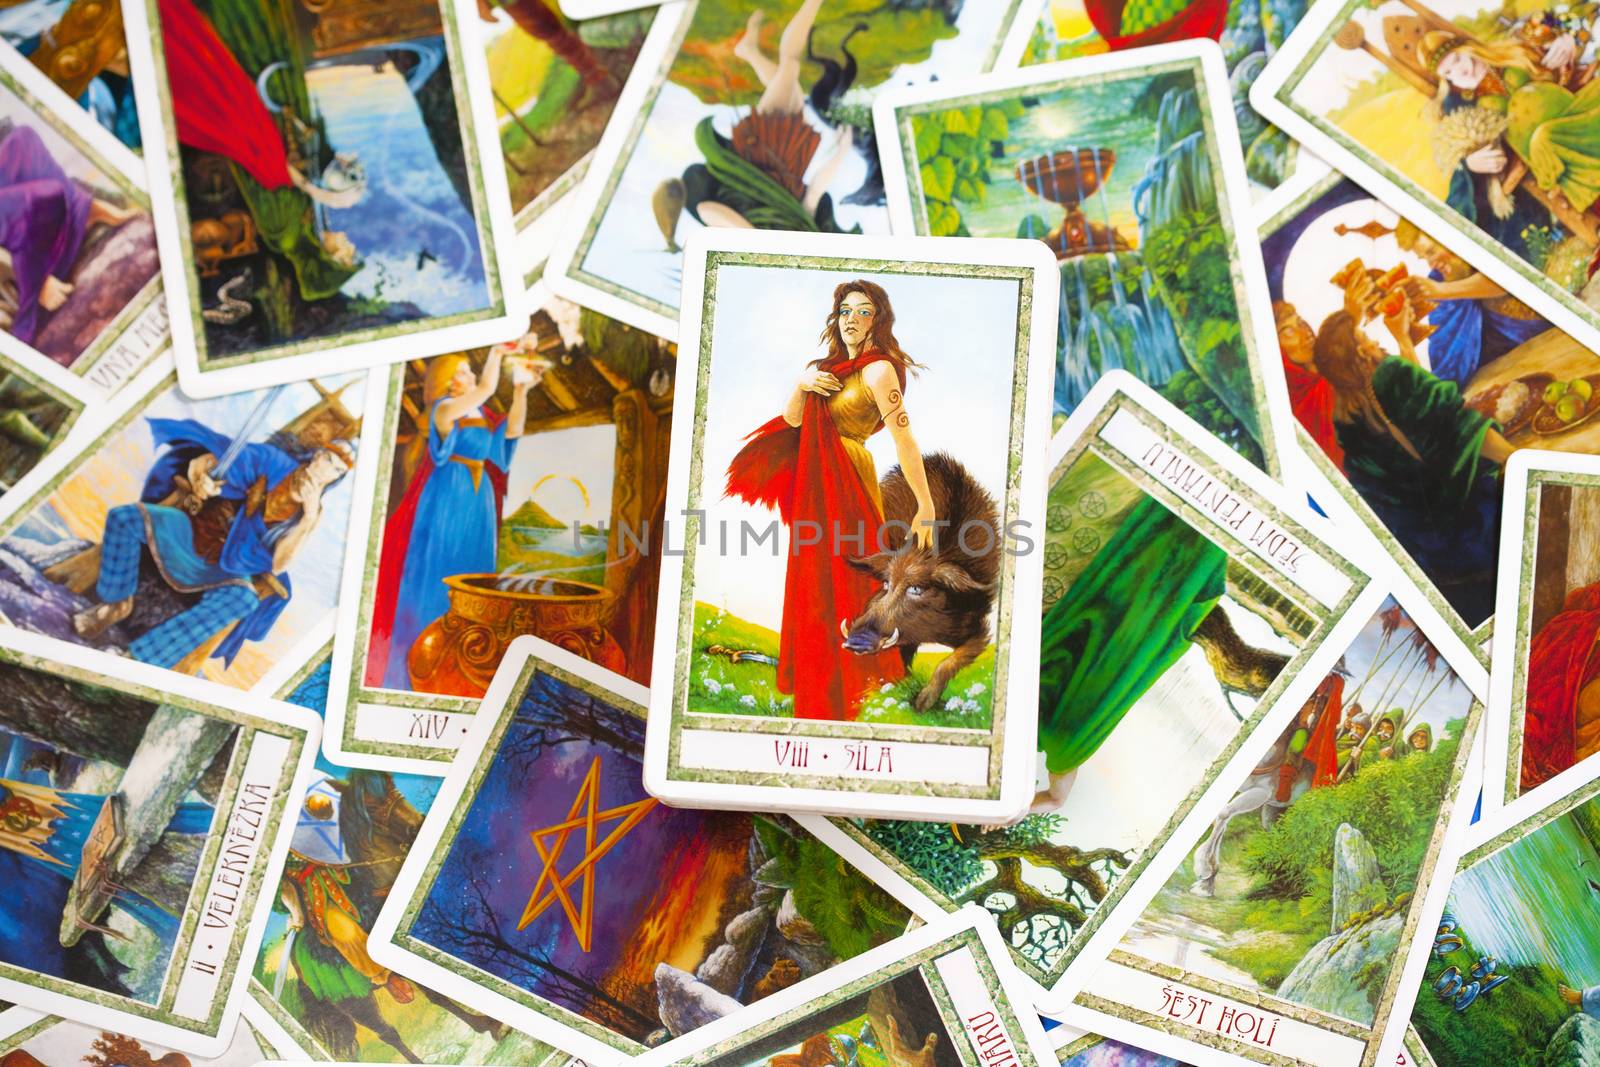 Tarot Cards - Central Card in Focus - rest out of focus